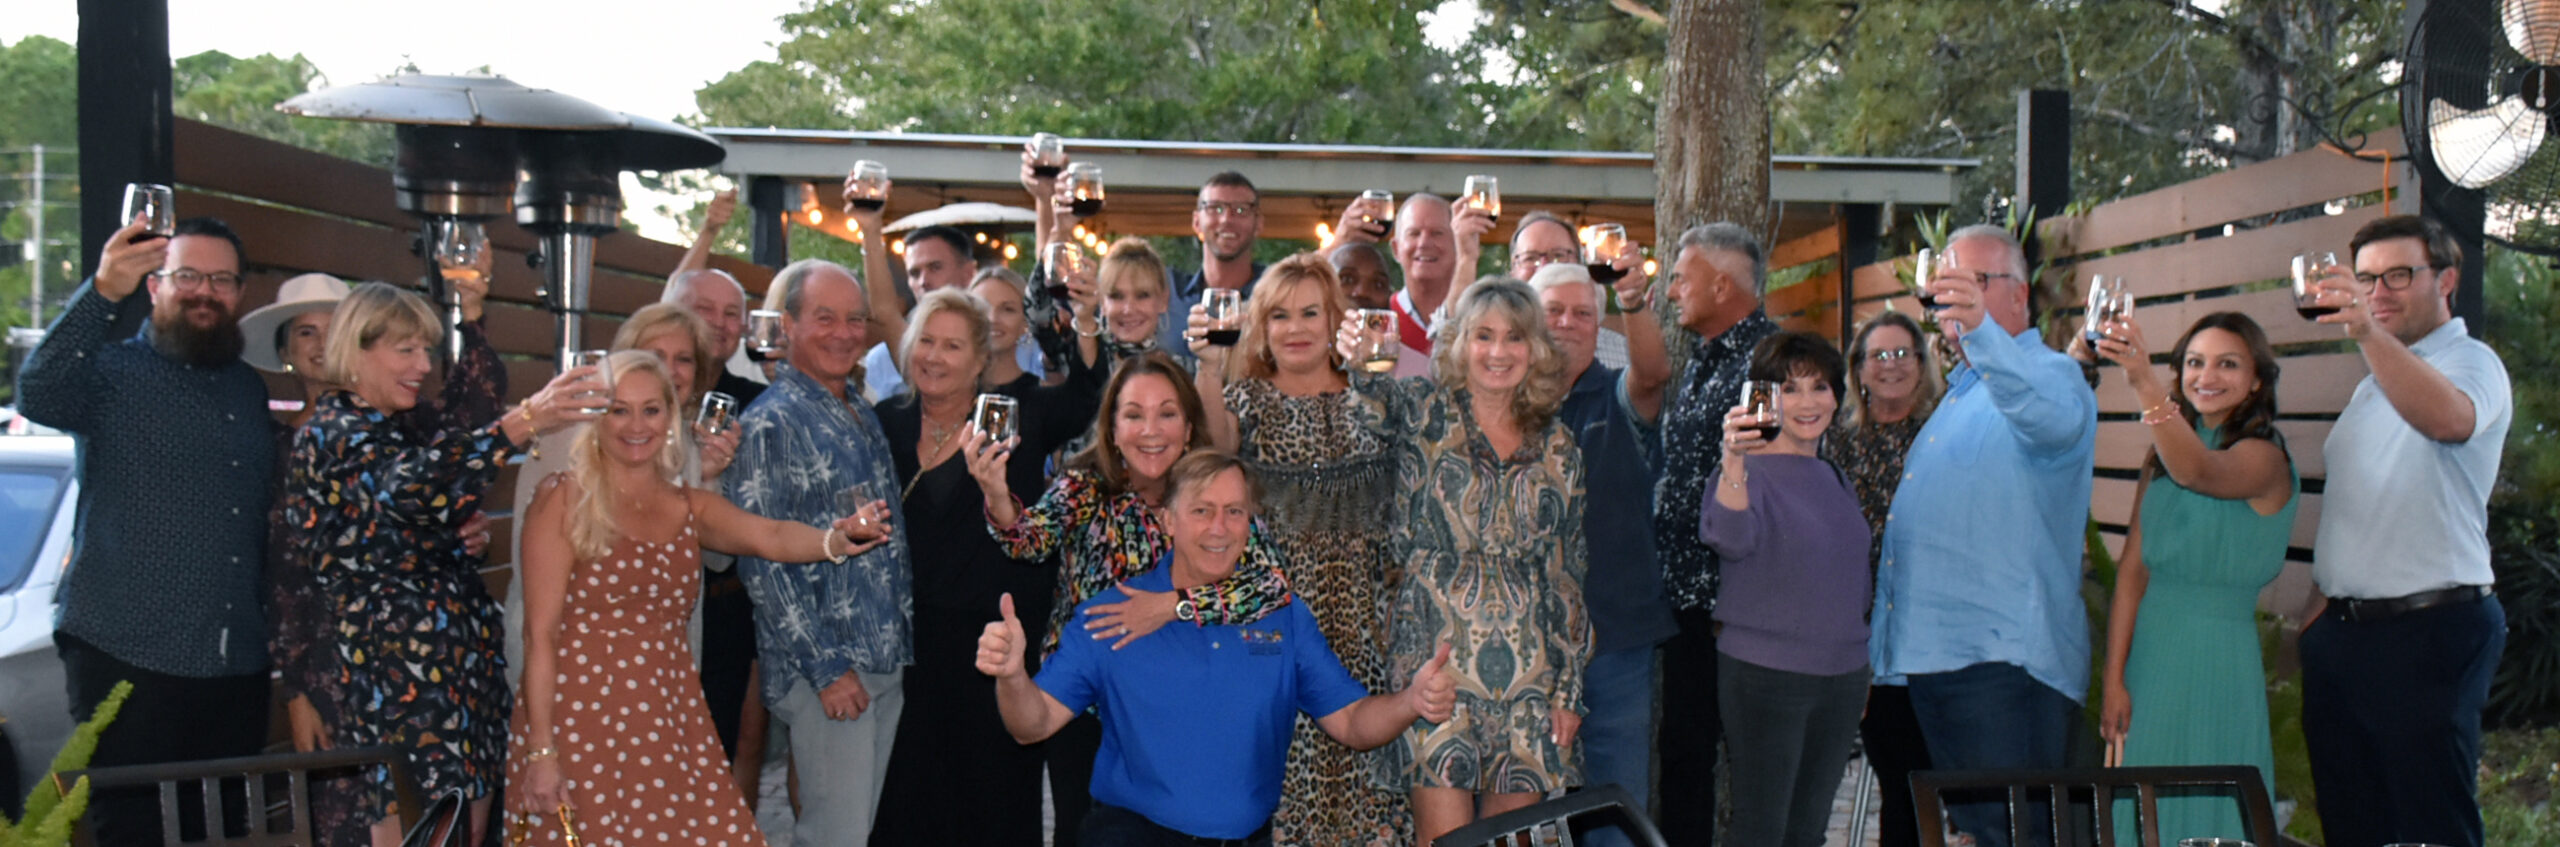 9th annual Crust/Thompson 31Fifty Winery Dinner helps children at ECCAC